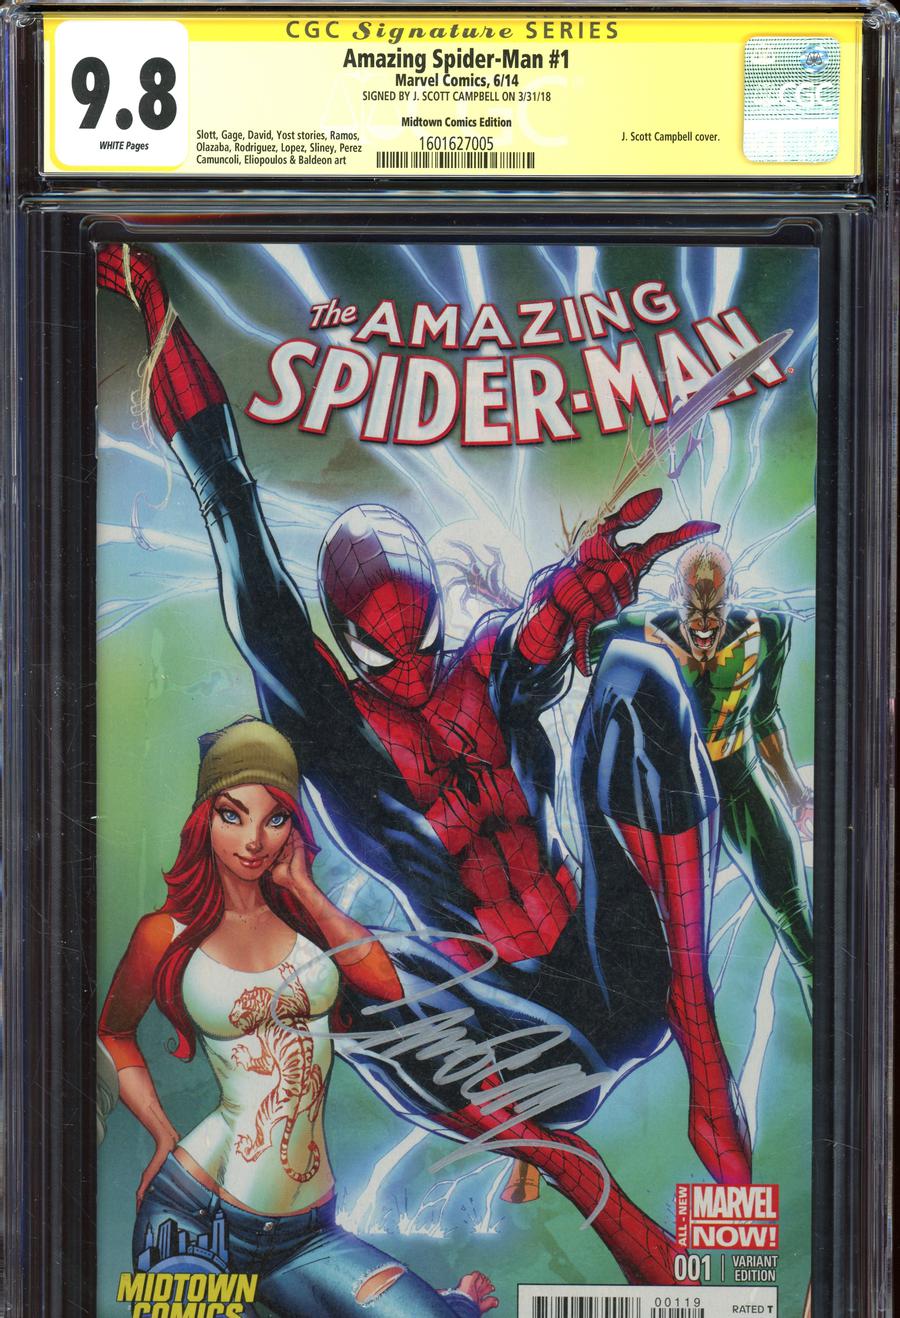 Amazing Spider-Man Vol 3 #1  Midtown Exclusive J Scott Campbell Connecting Color Variant Cover Signed By J Scott Campbell CGC 9.8 (2 of 3)